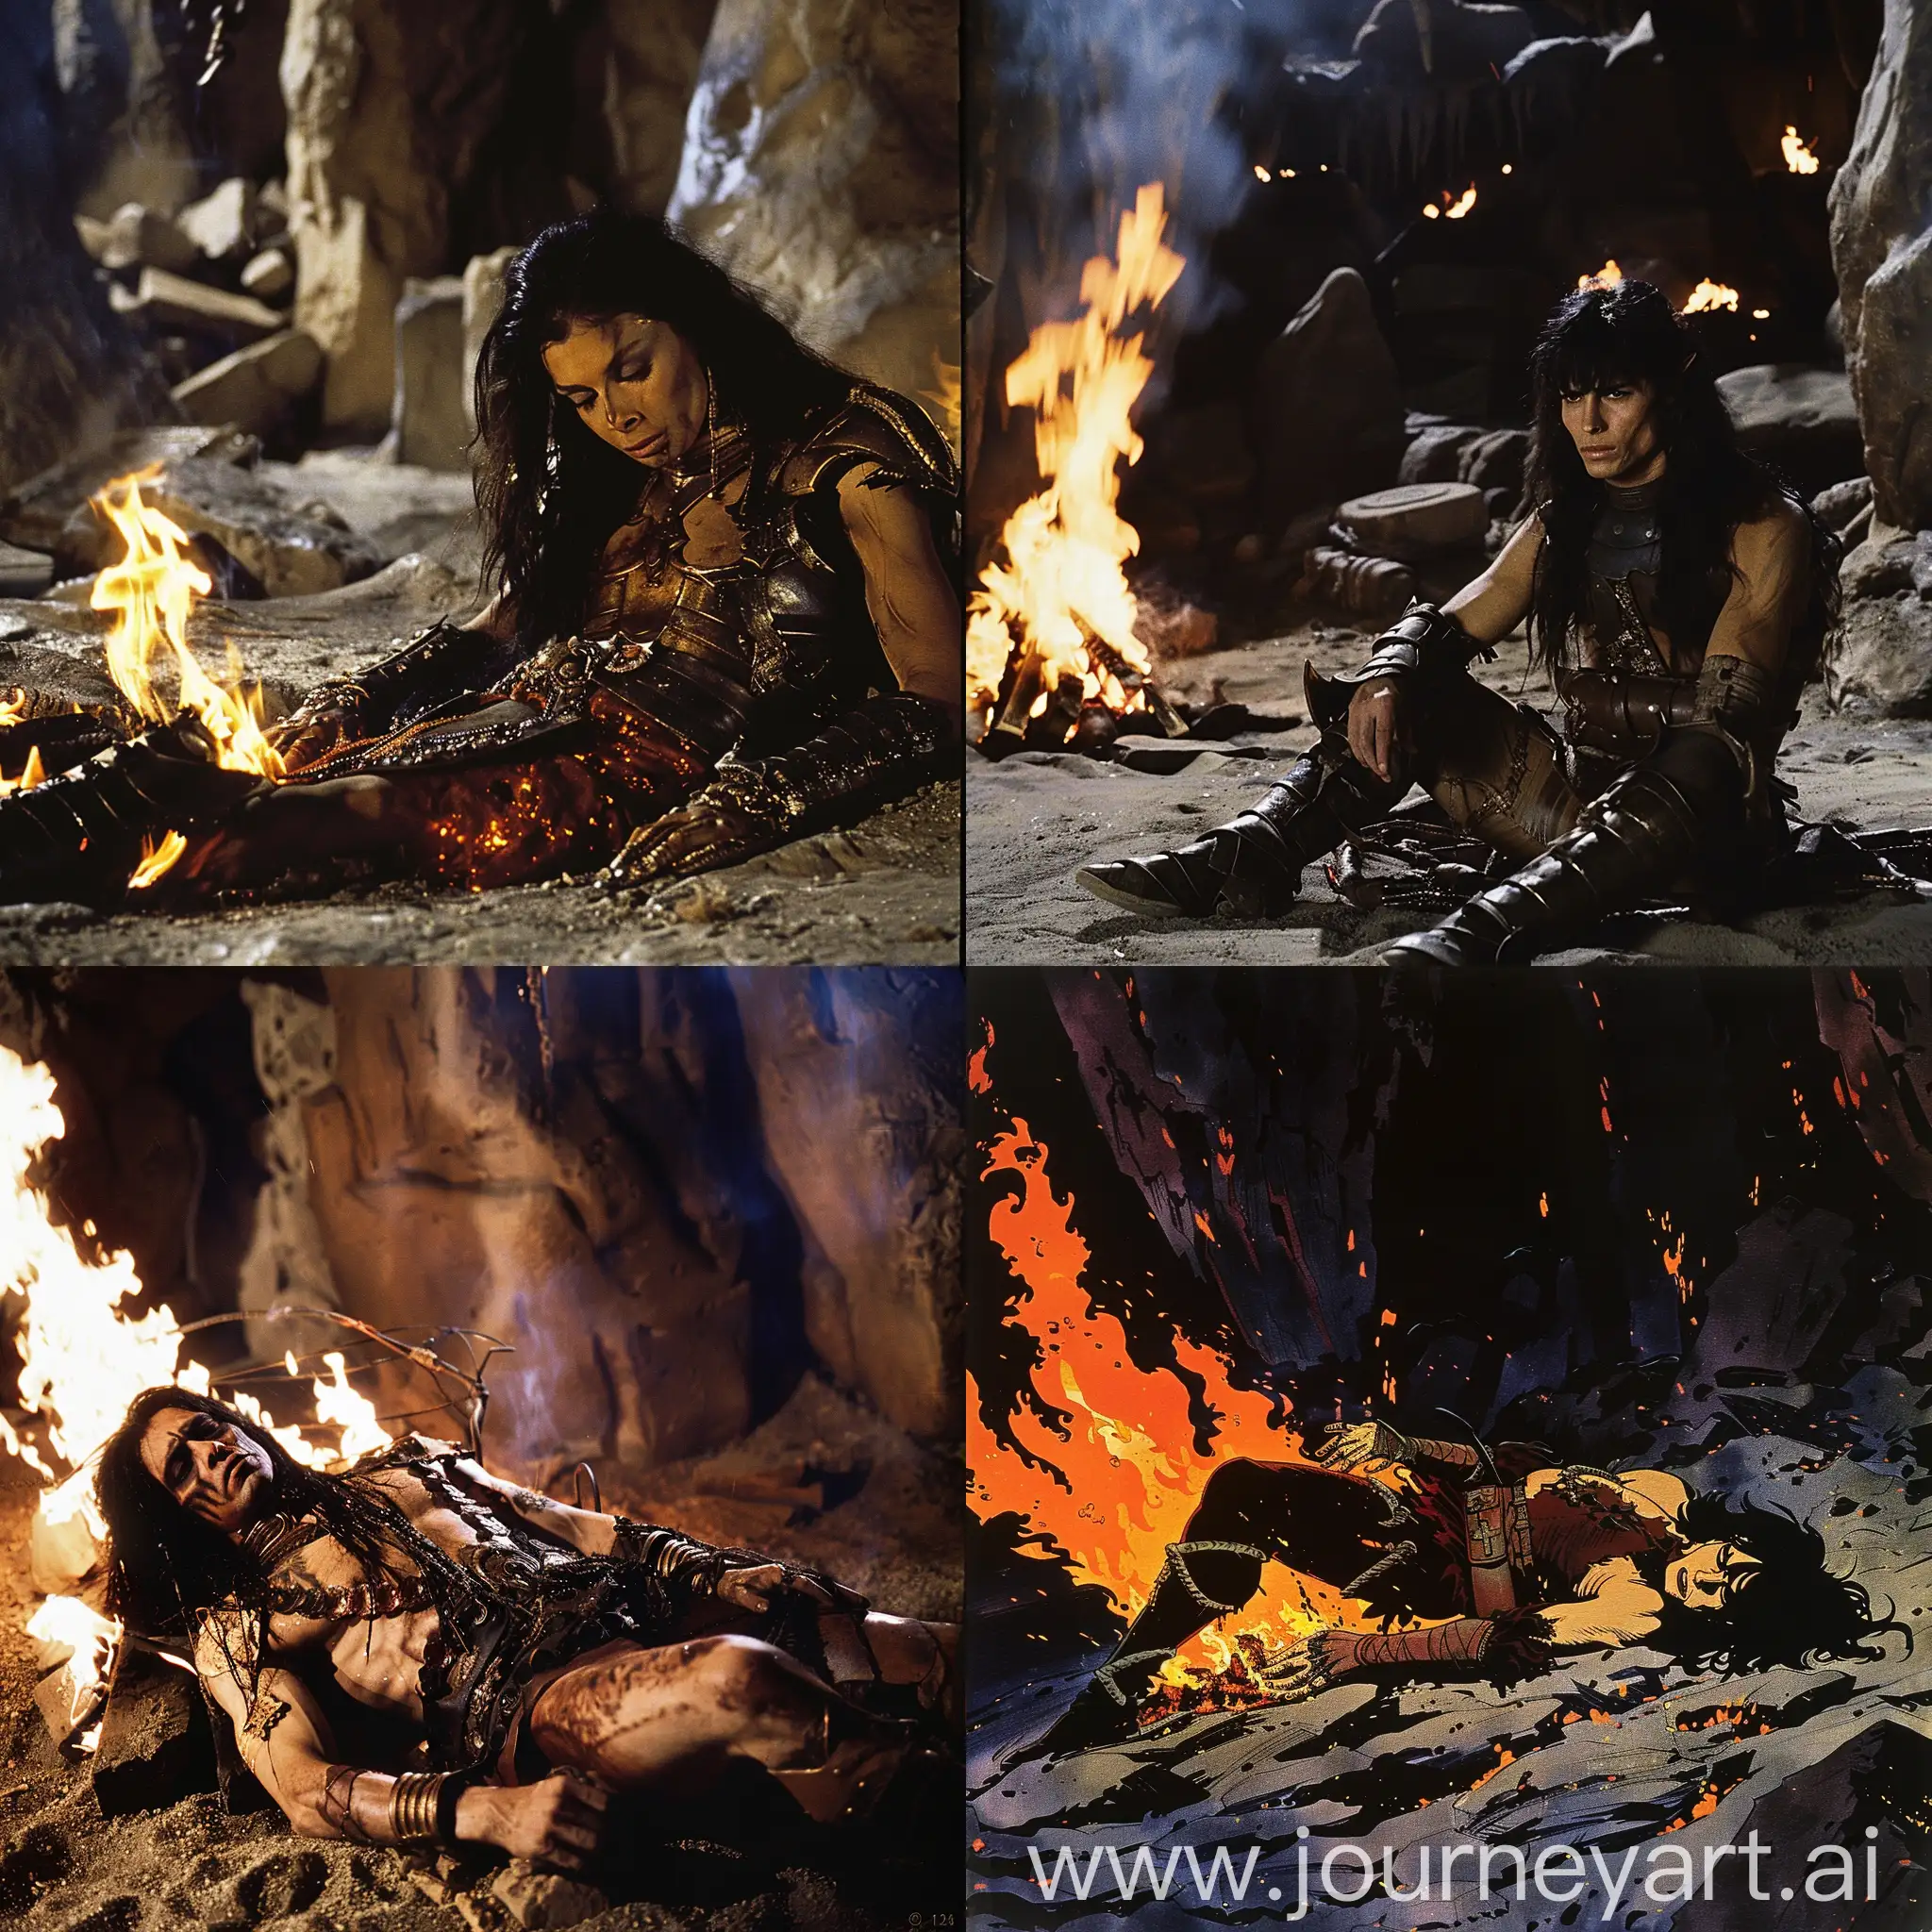 dvd screenengrabs character/Arx Fatalis, dead dark-haired warrior on a funeral pyre in the underground kingdom 1980 style